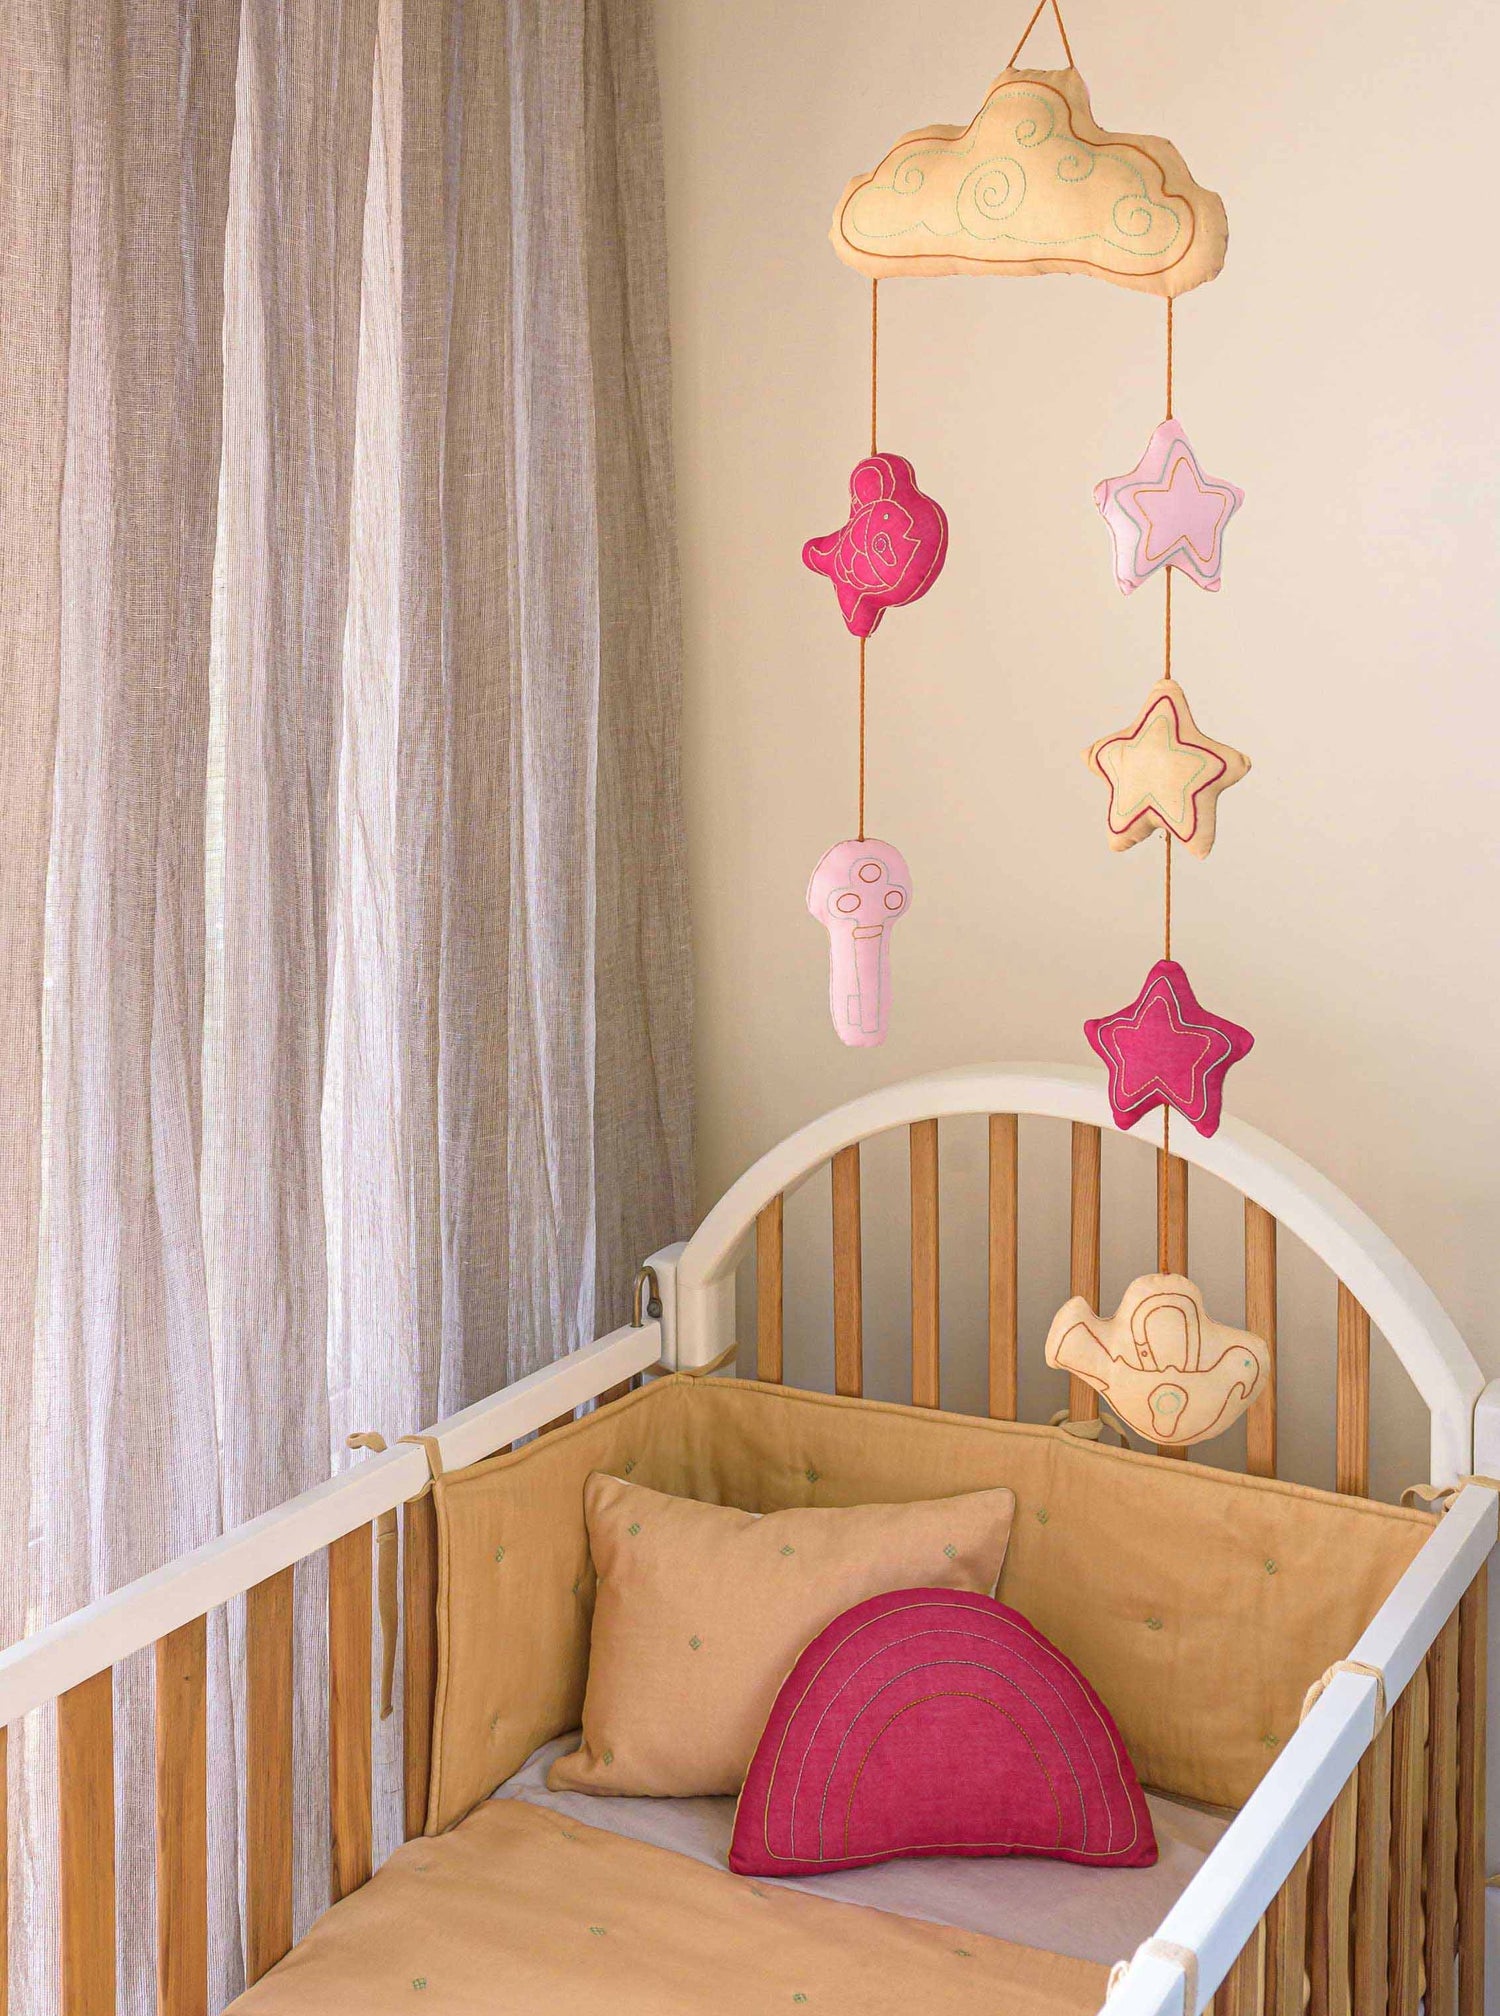 Wheat Lucky Charm baby mobile hanging from ceiling placed in a nursery room